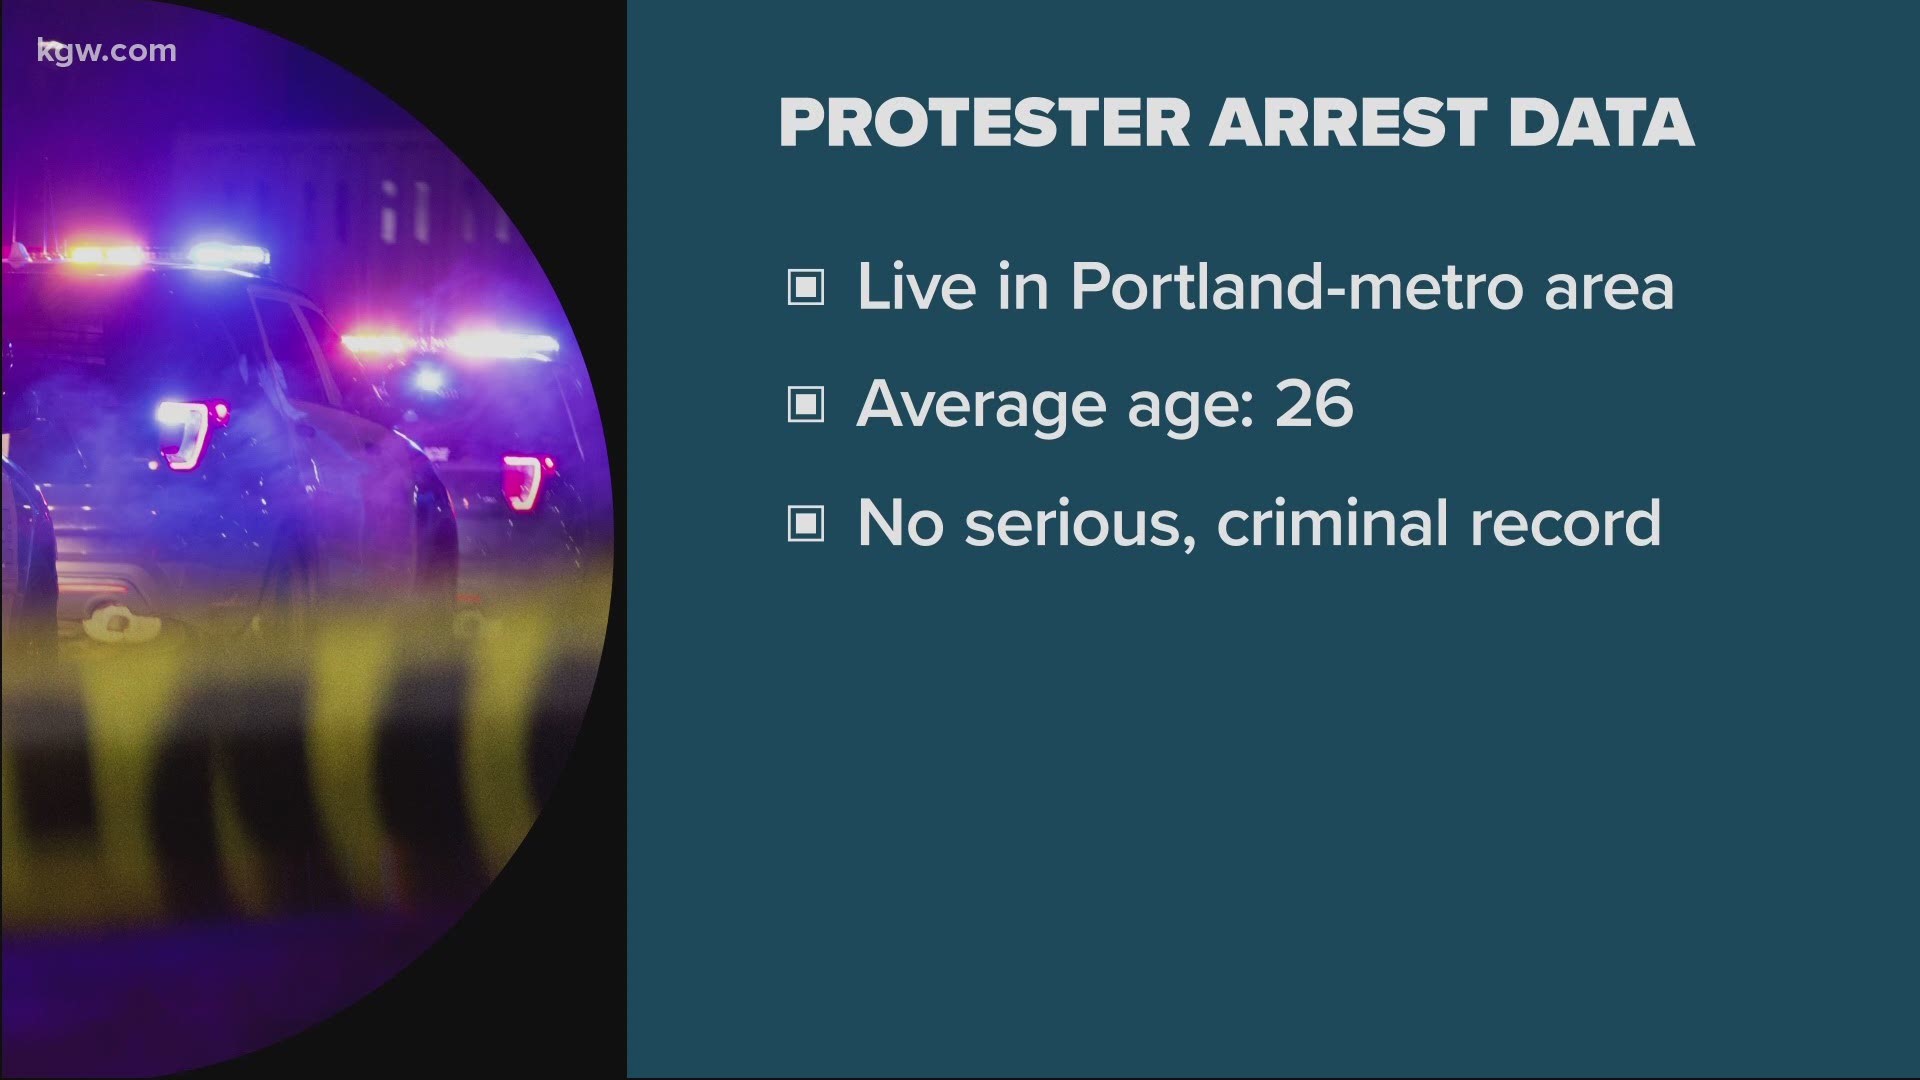 KGW analyzed court files, jail records and other sources of public information for 168 people arrested within the past week and a half in Portland.